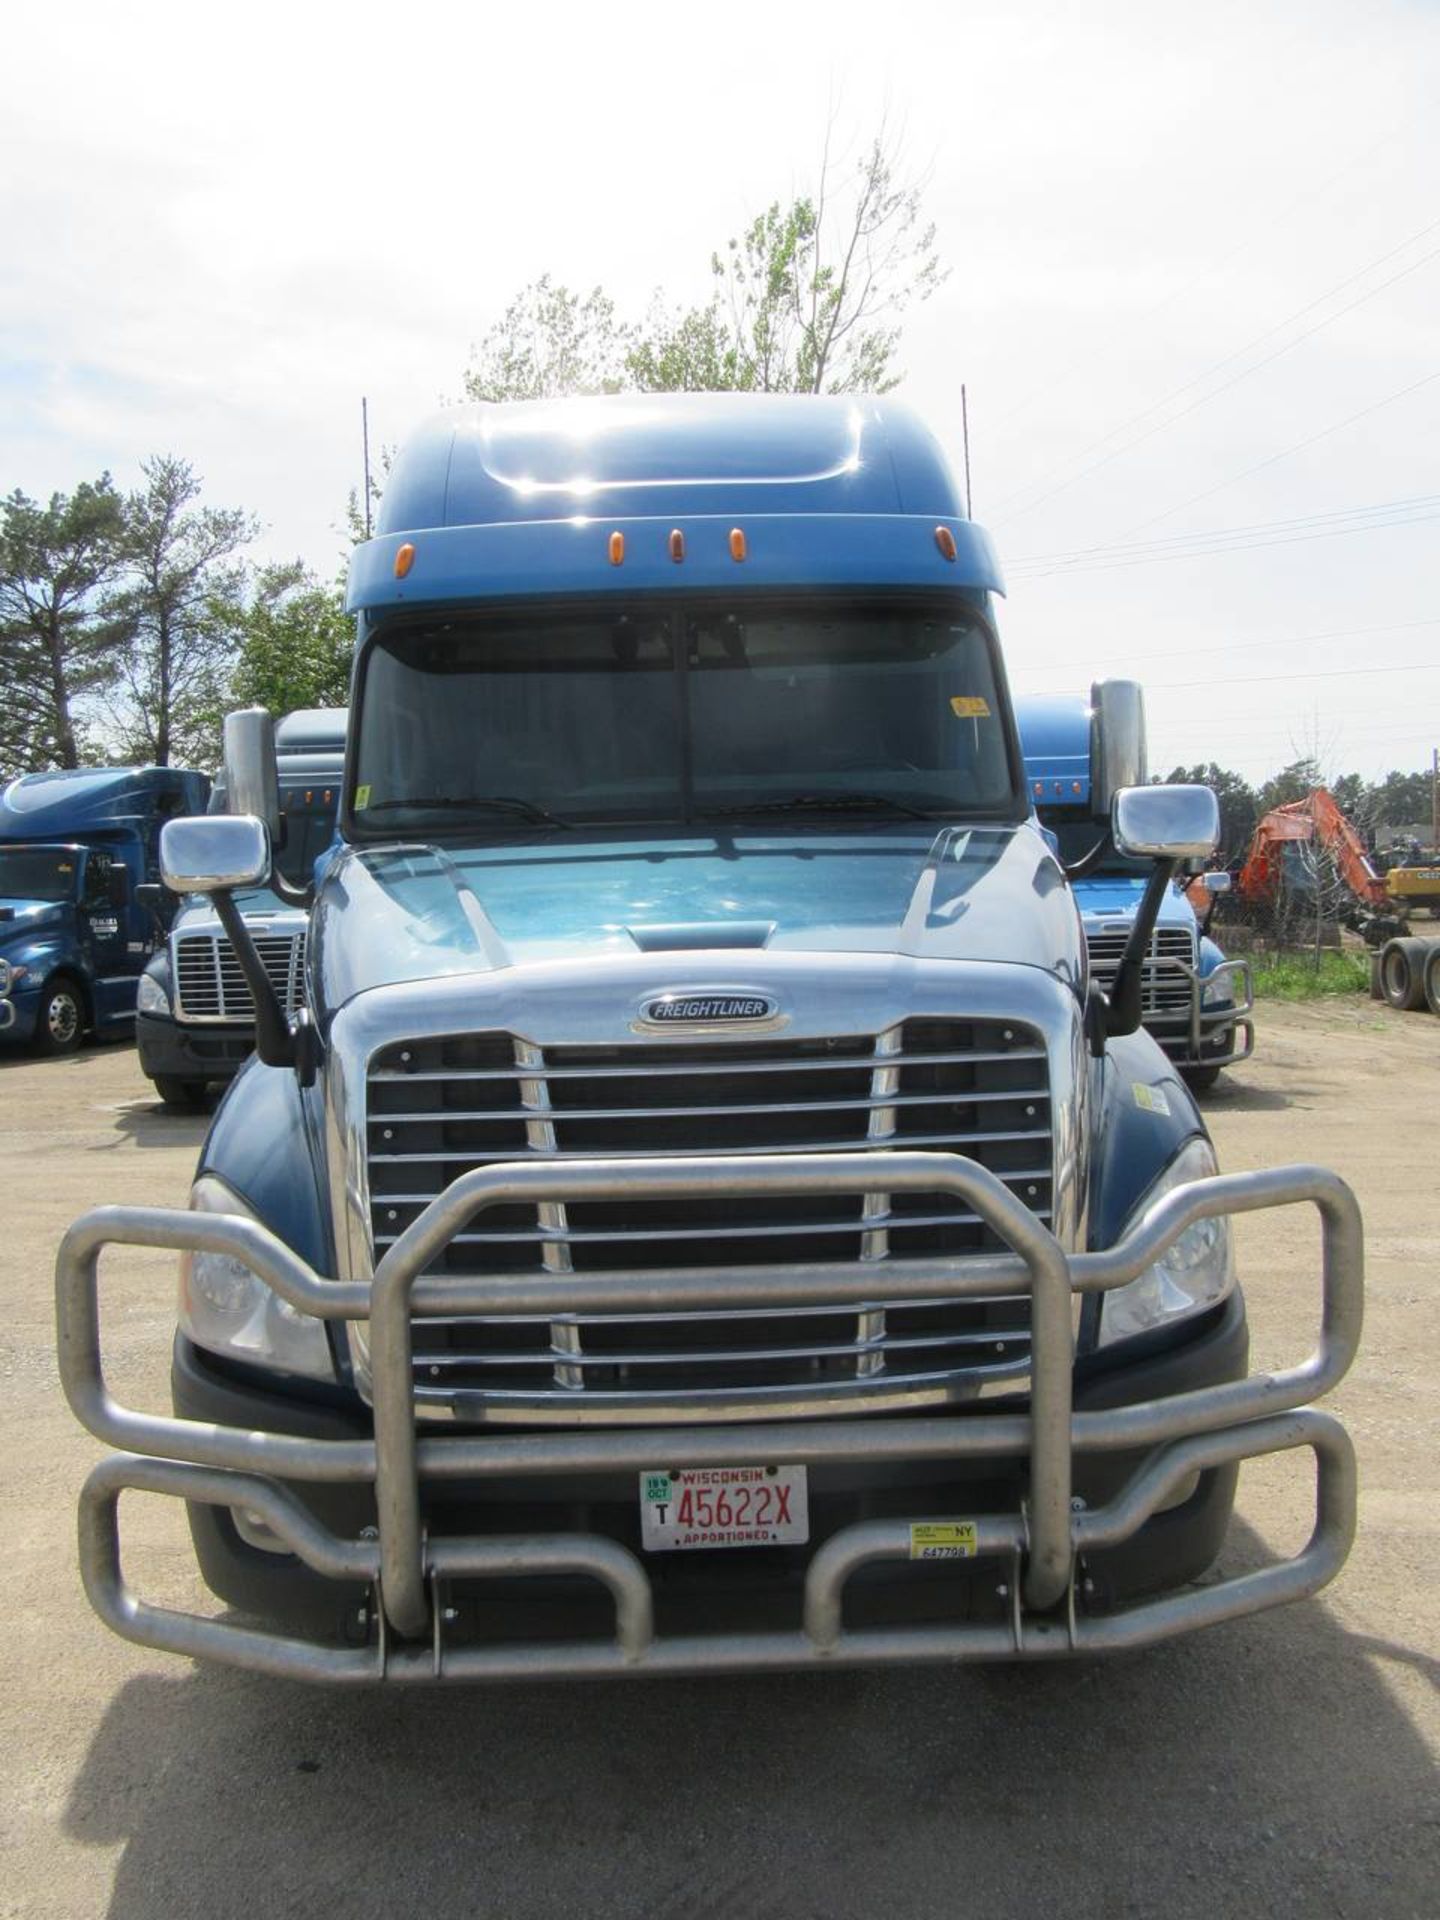 2012 Freightliner Cascadia Tractor - Image 2 of 10